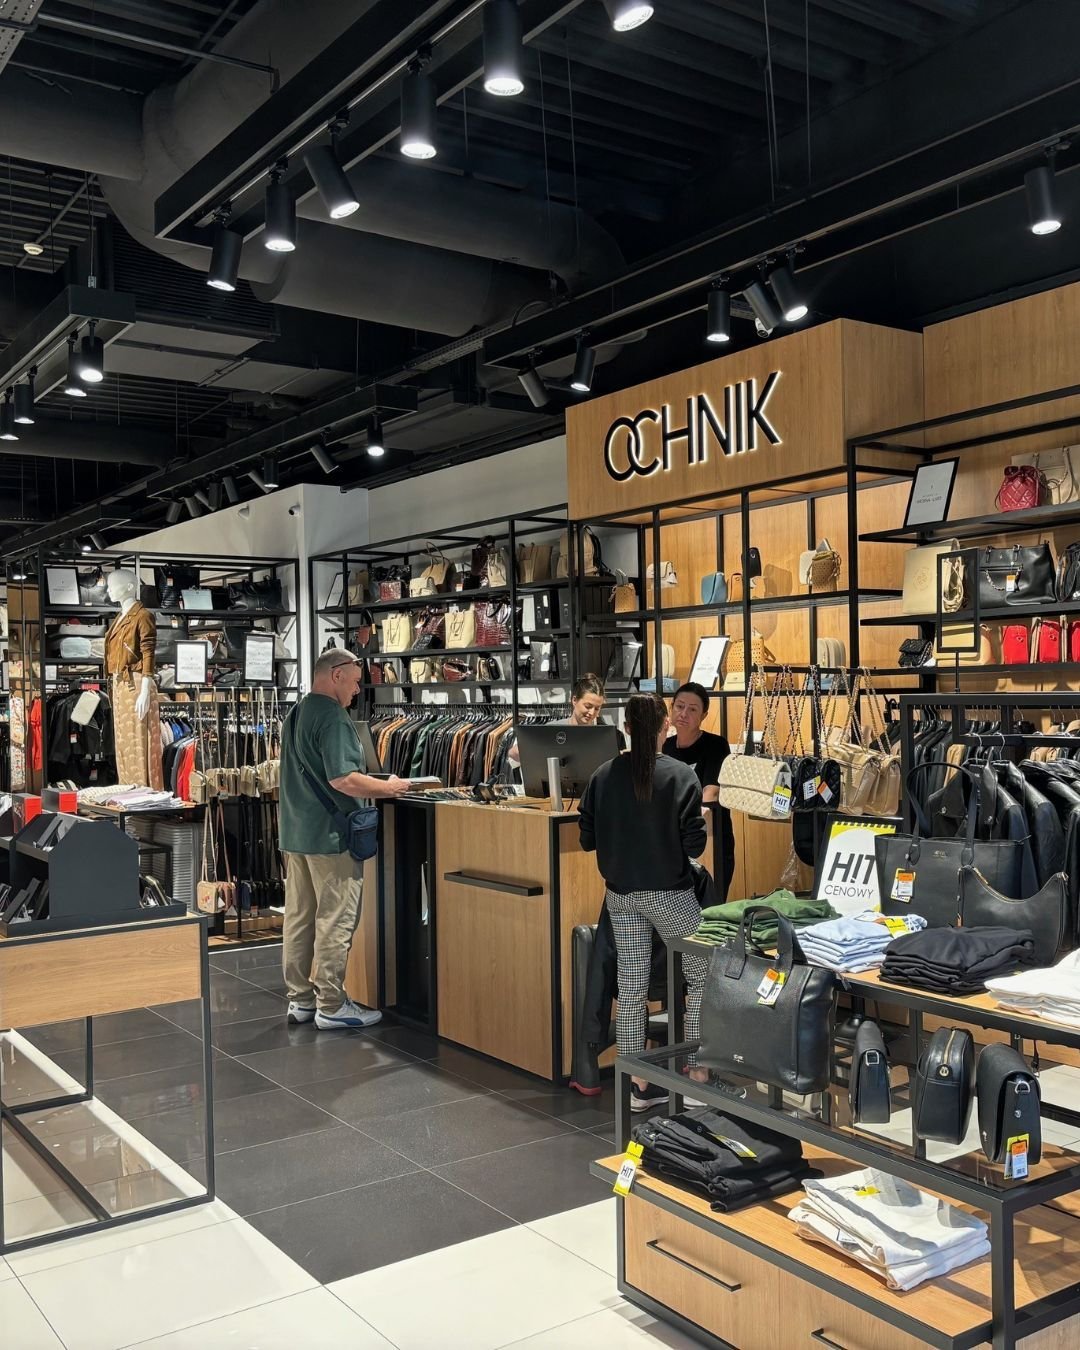 Welcome back Ochnik at @designeroutletsosnowiec! 🤩

After a store relocation, Ochnik has increased significantly its gross lettable area from 84,93 sqm to 343 sqm. The Polish company, with over 30 years of tradition, is ranked as one of the most rec